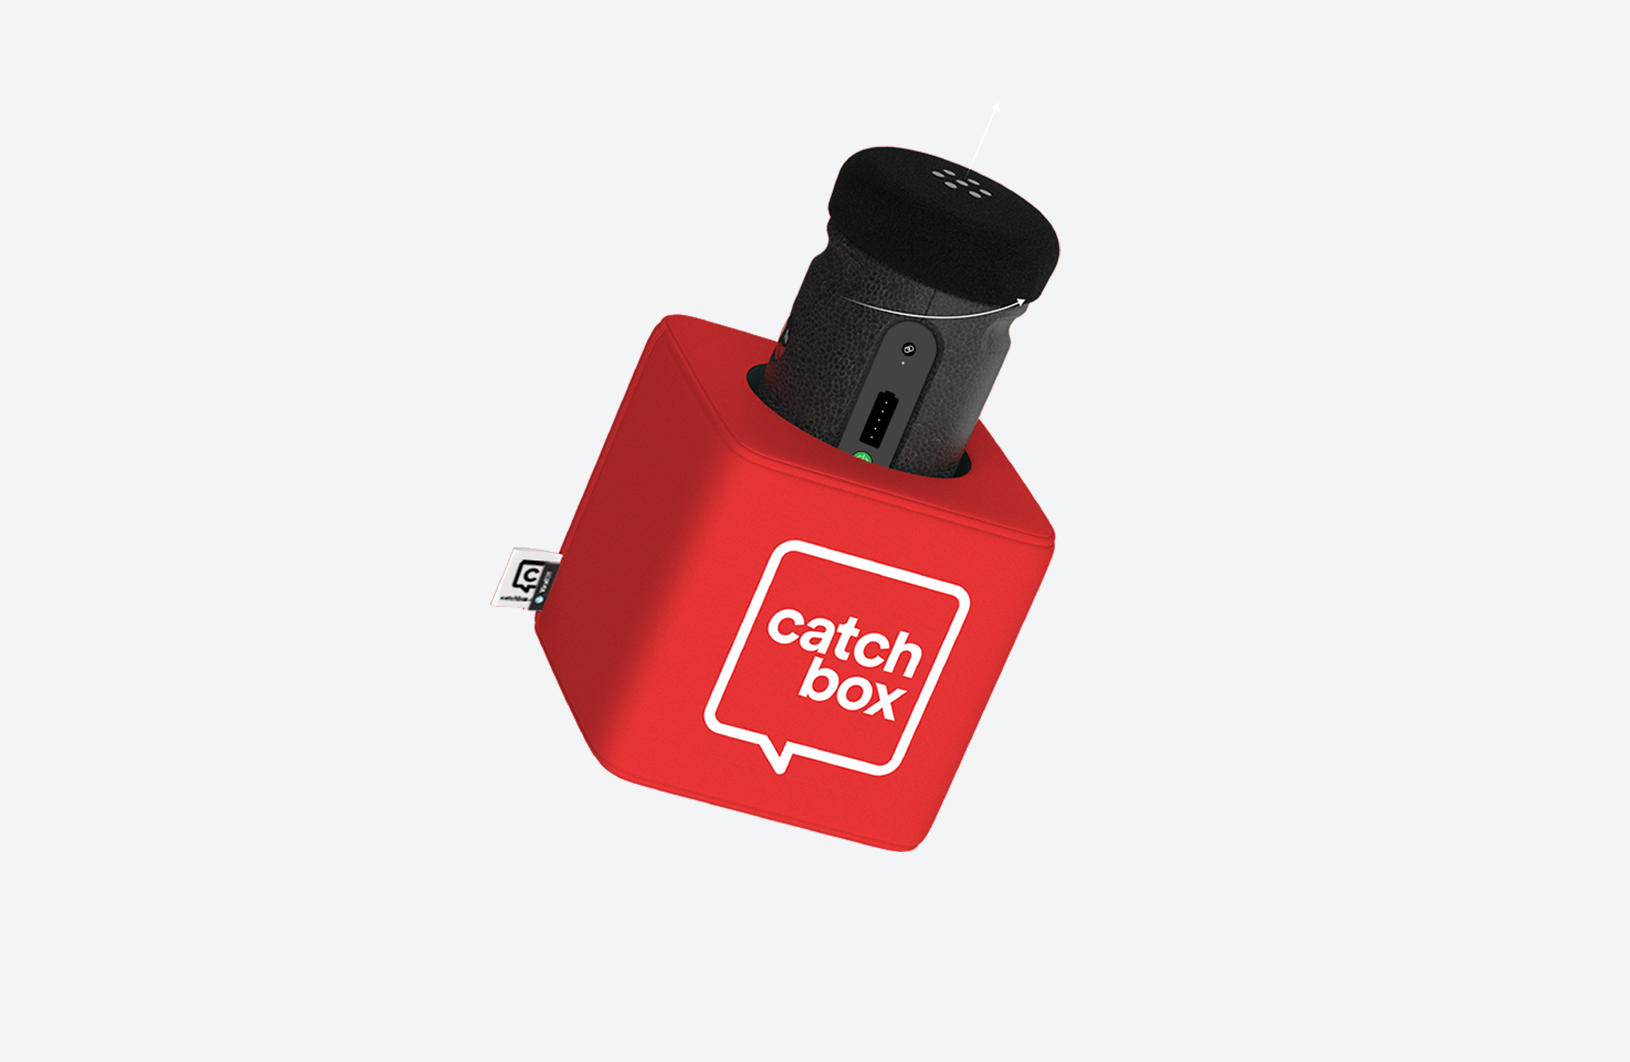 Catchbox Cube and its microphone capsule